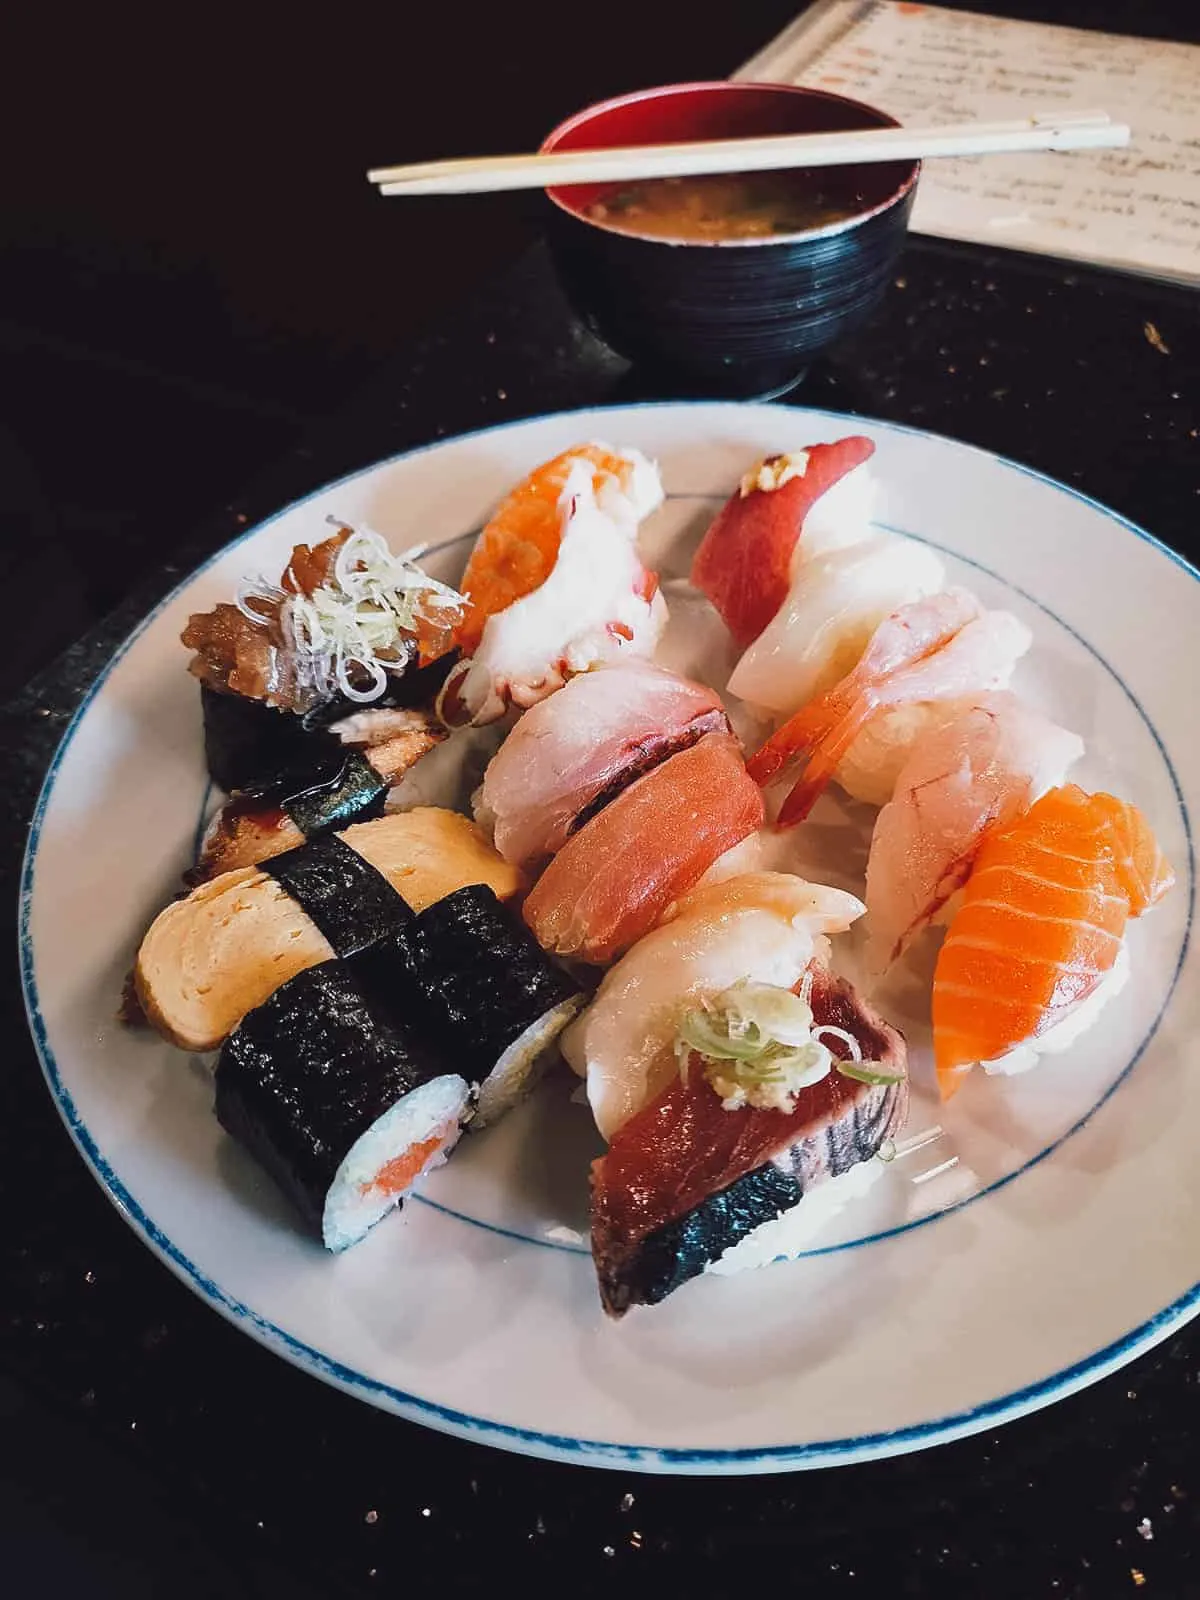 Plate of sushi, the classic Japanese dish of raw fish served with vinegared sushi rice